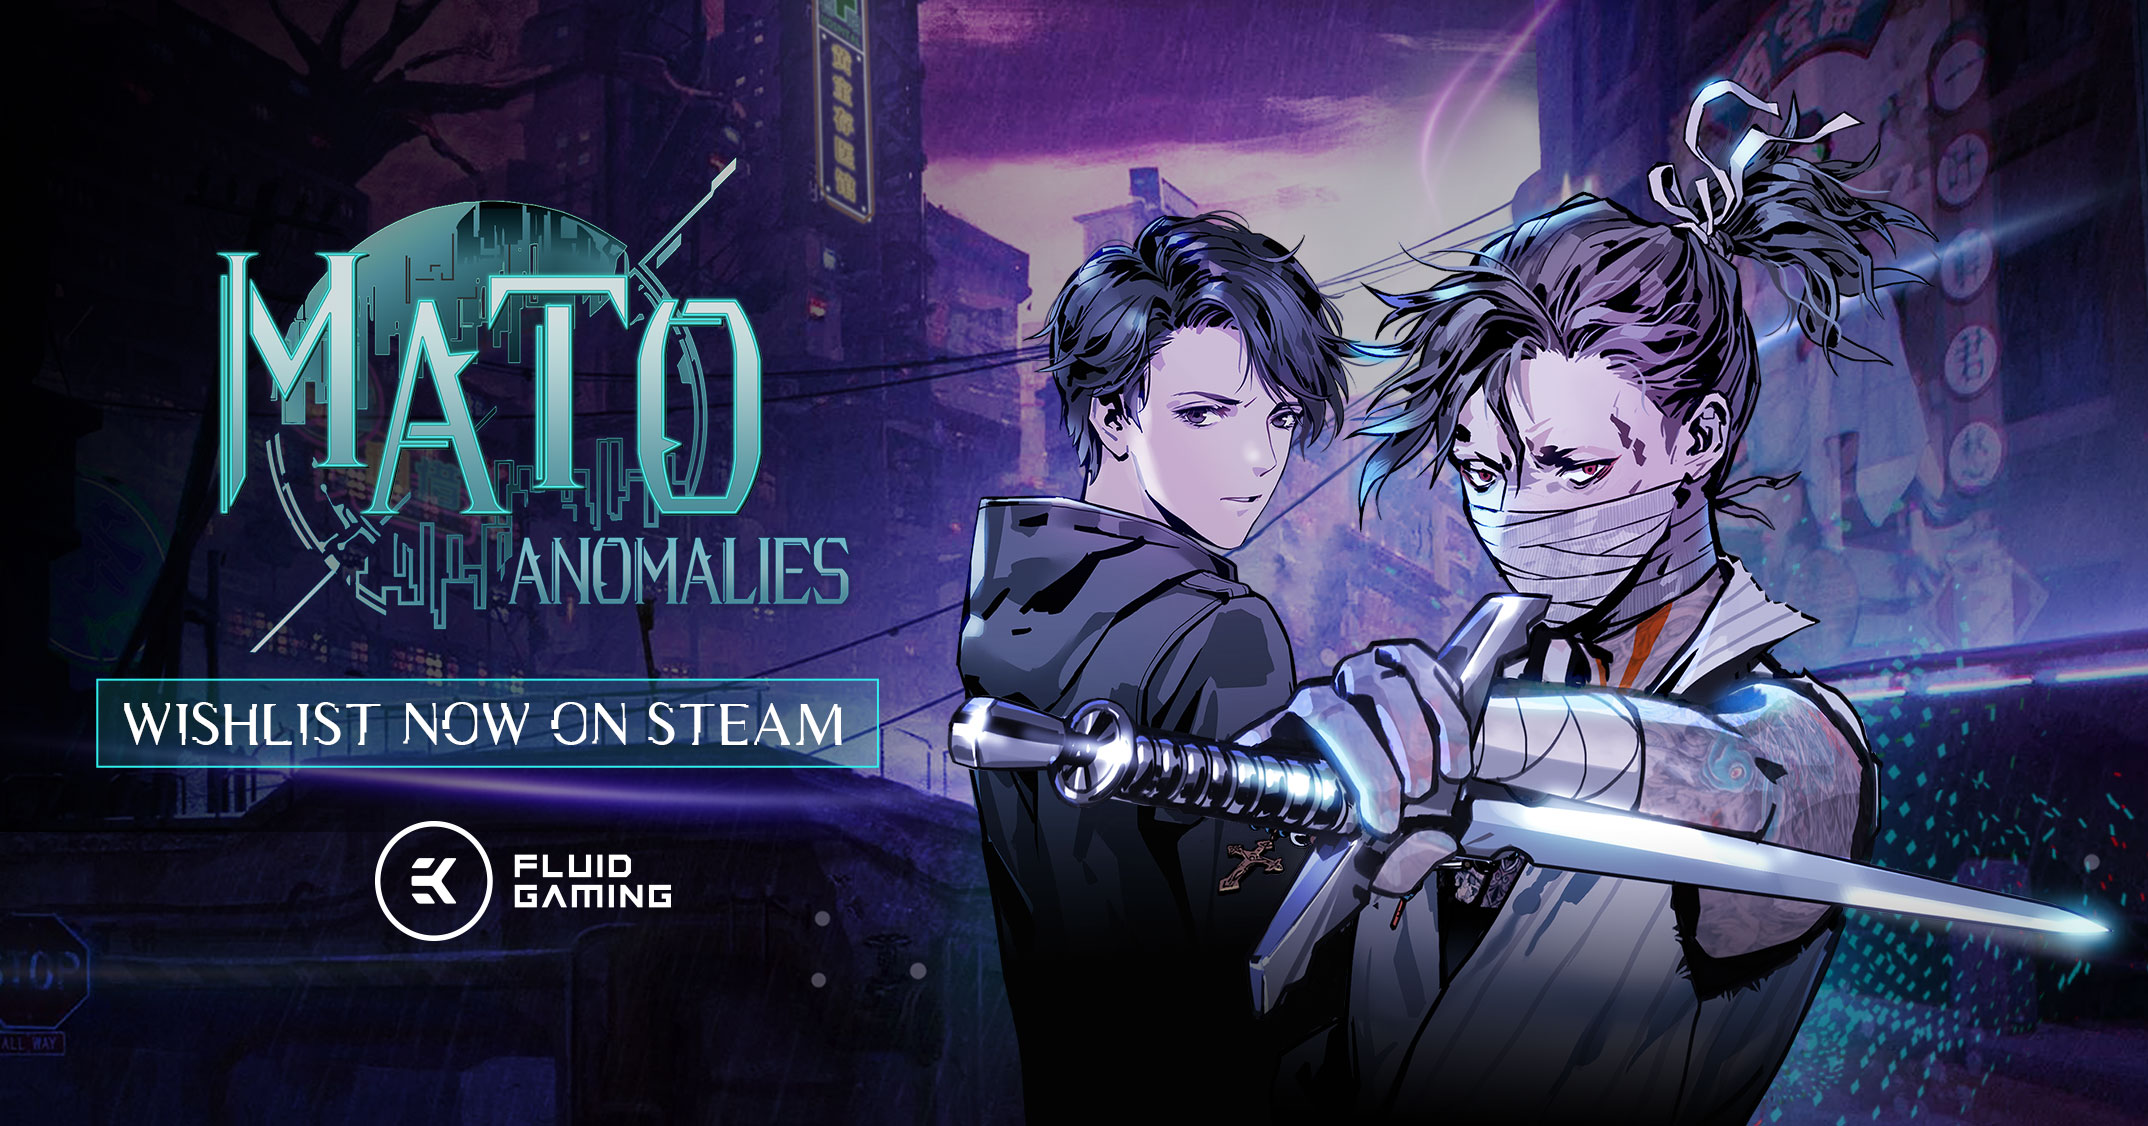 Play Mato Anomalies, the upcoming game from Plaion, on a fully liquid-cooled EK Fluid Gaming PC. Visit EK at PAX West 2022.